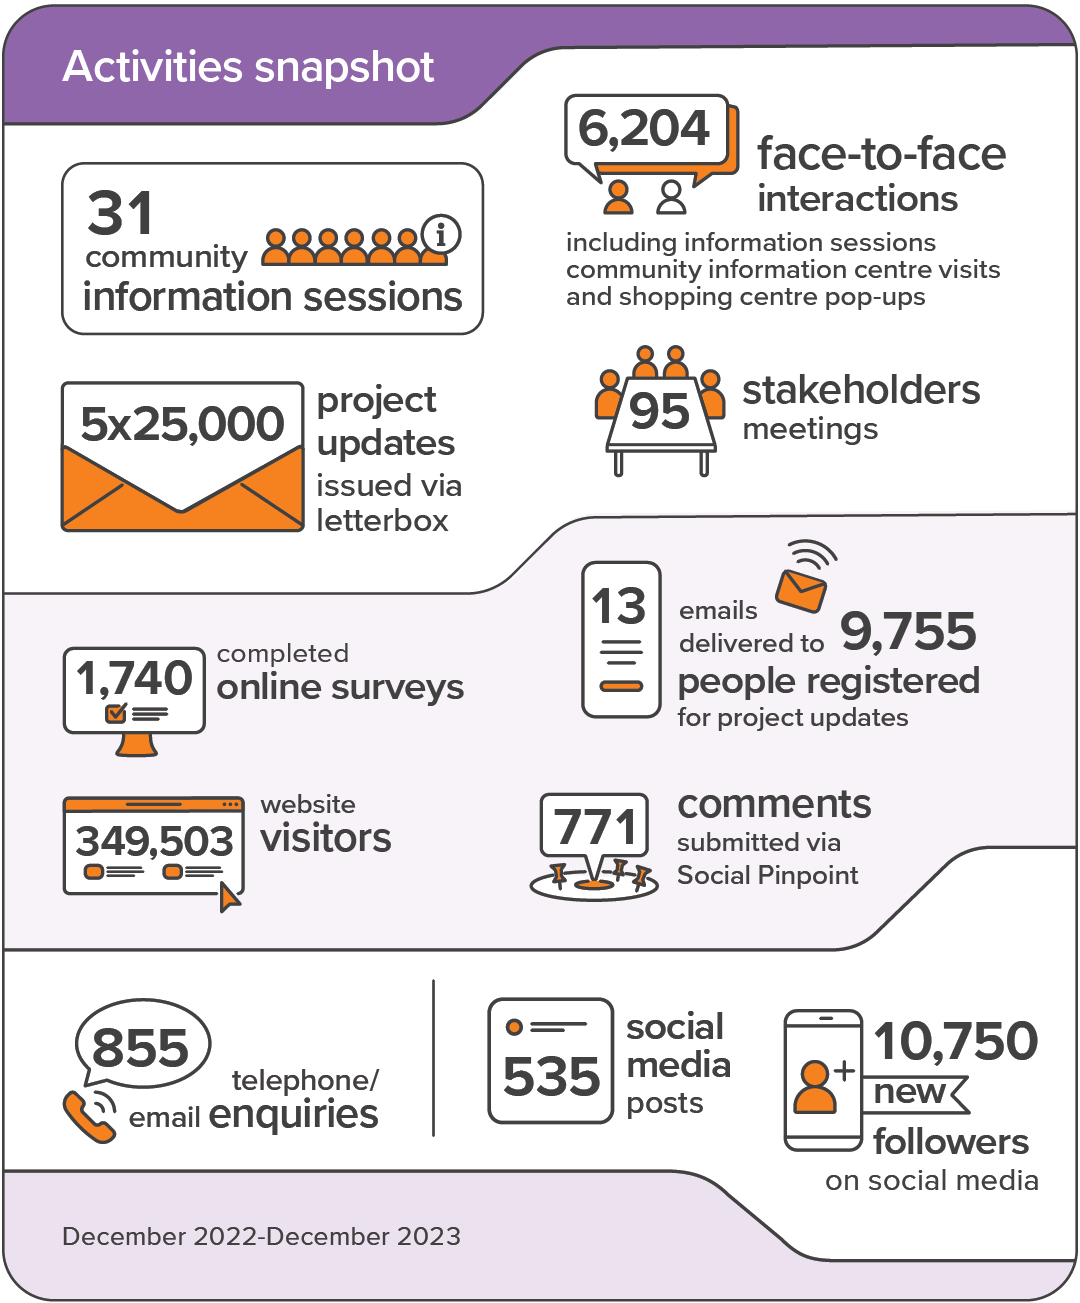 Activities snapshot statistics, December 2022–December 2023. 31 community information sessions. 5 times 25,000 project updates issued via letterbox. 6,204 face-to-face interactions including information sessions, community information centre visits and shopping centre pop-ups. 95 stakeholder meetings. 1,740 completed online surveys. 349,5003 website visitors. 13 emails delivered to 9,755 people registered for project updates. 771 comments submitted via Social Pinpoint. 855 telephone/email enquiries. 535 social media posts. 10,750 new followers on social media.